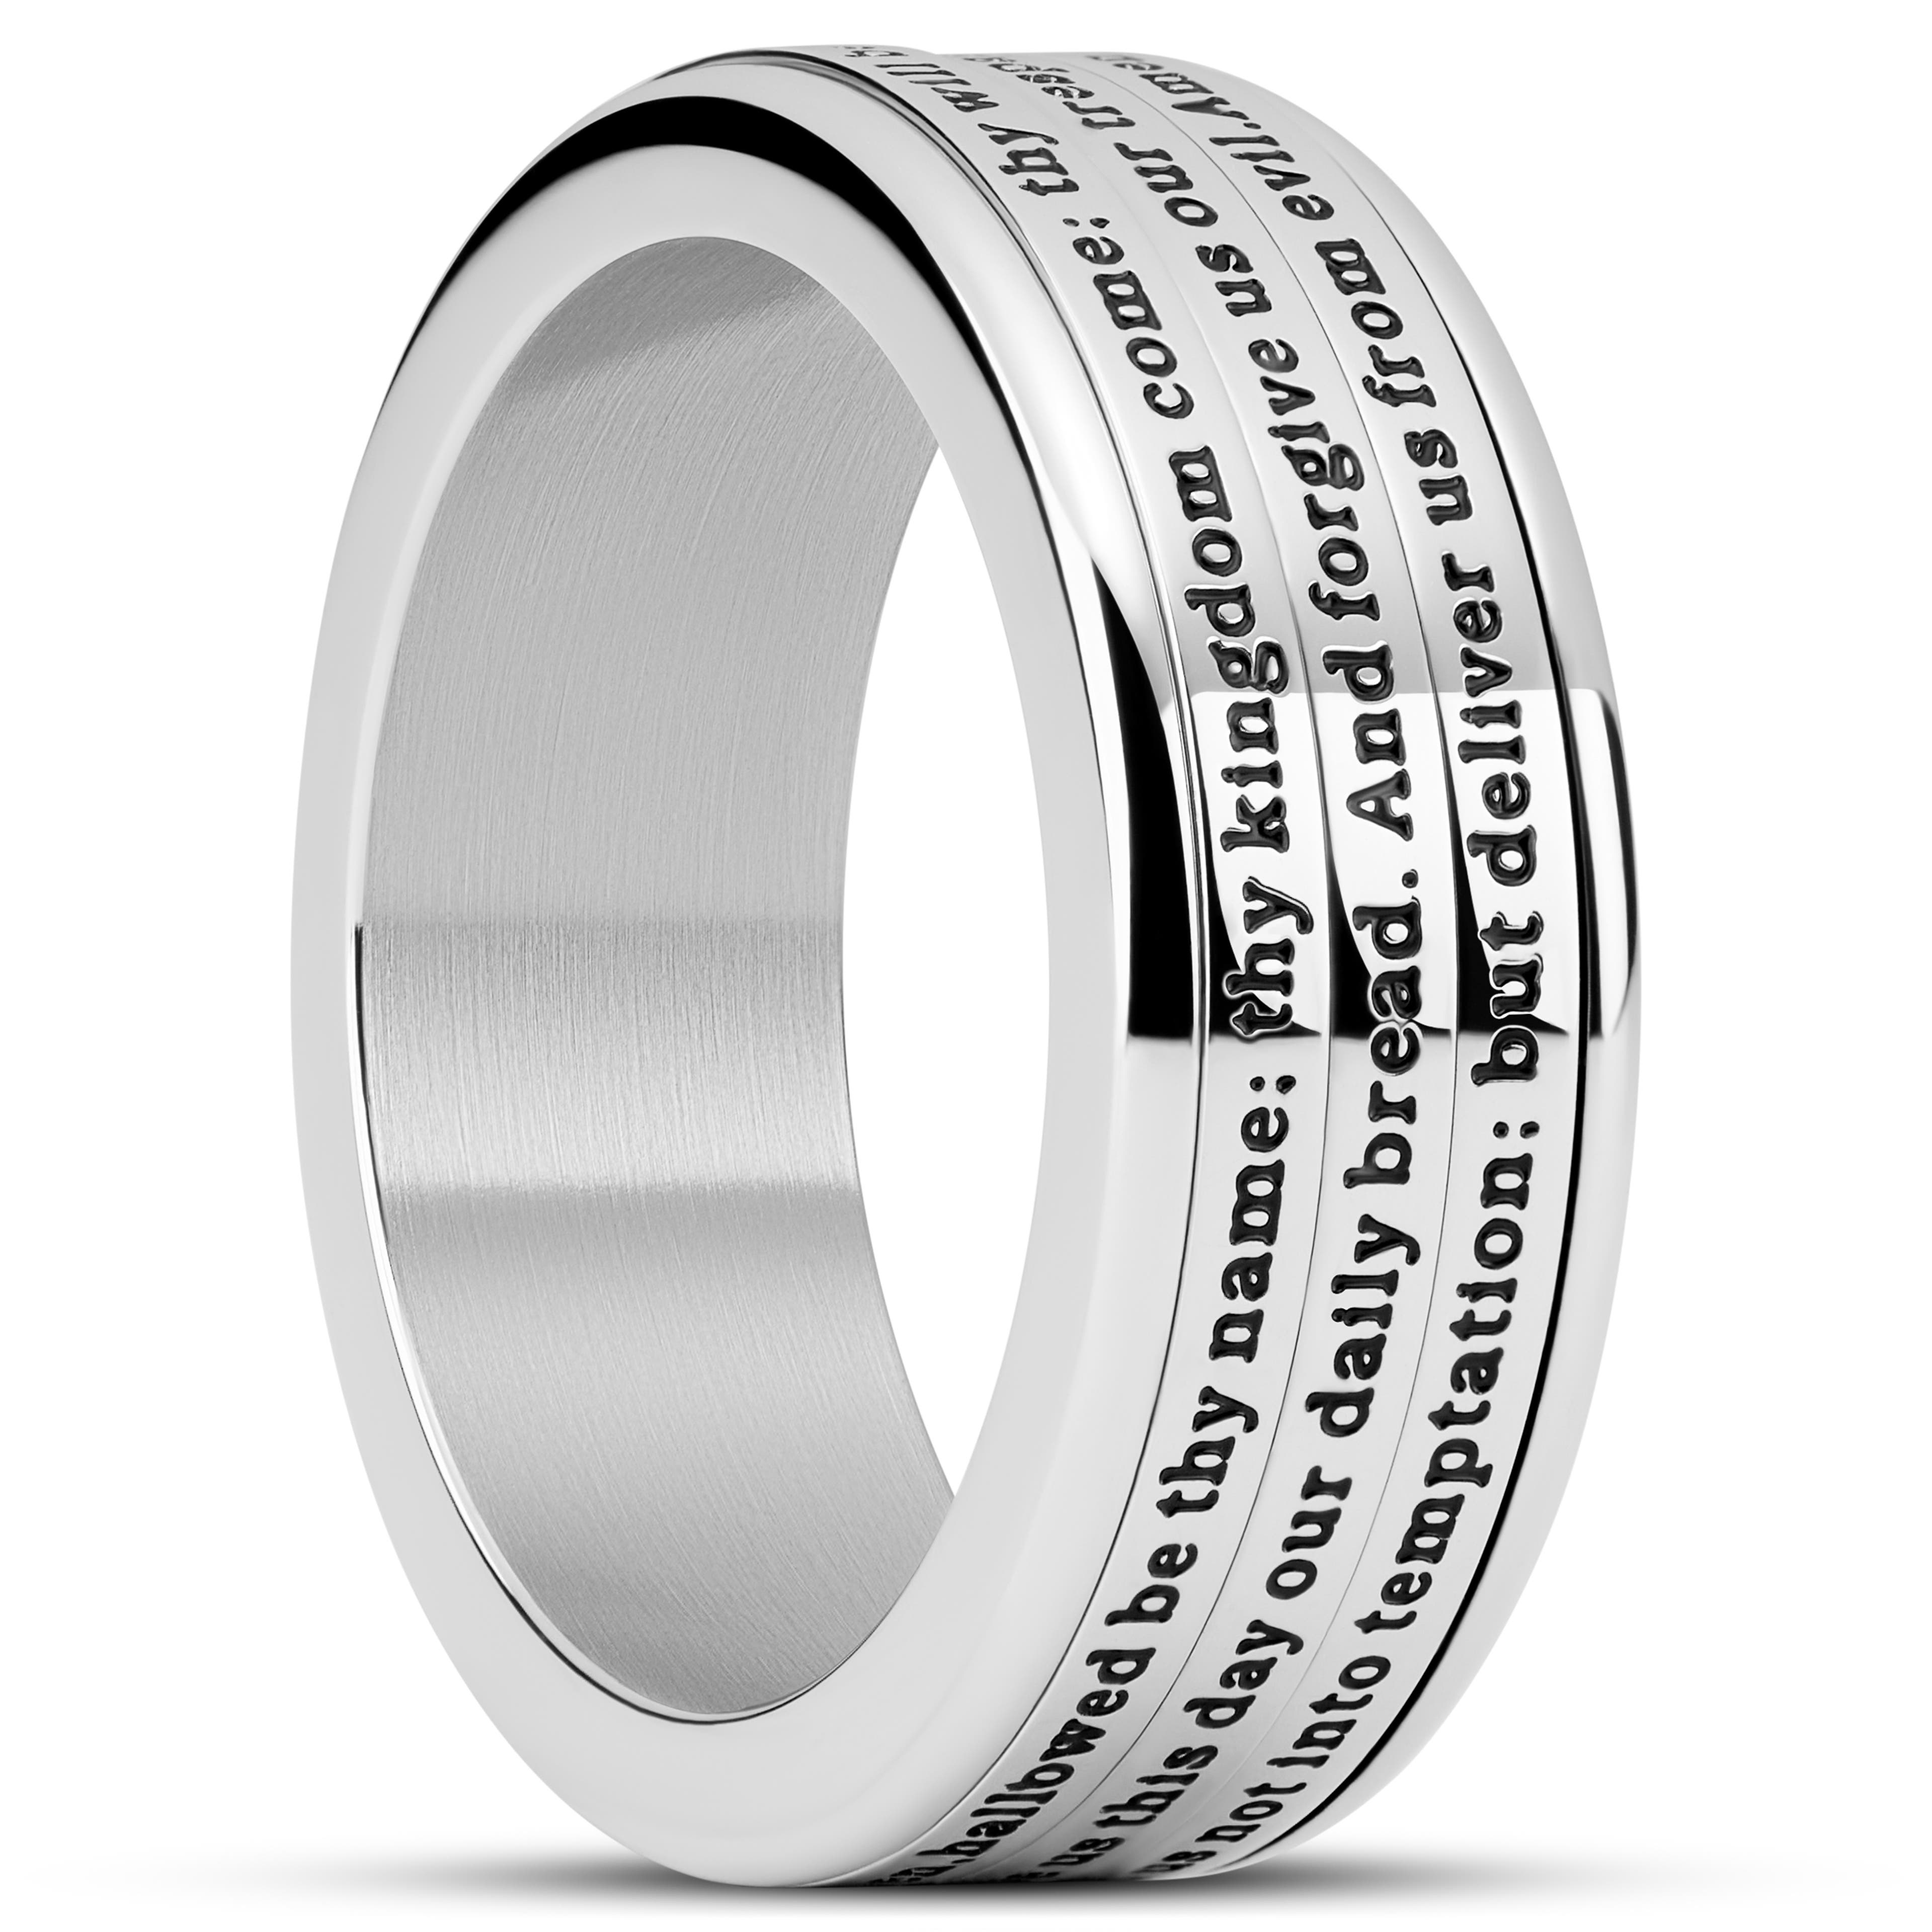 Enthumema | 1/3" (8 mm) Silver-tone Stainless Steel English Lord’s Prayer Fidget Ring